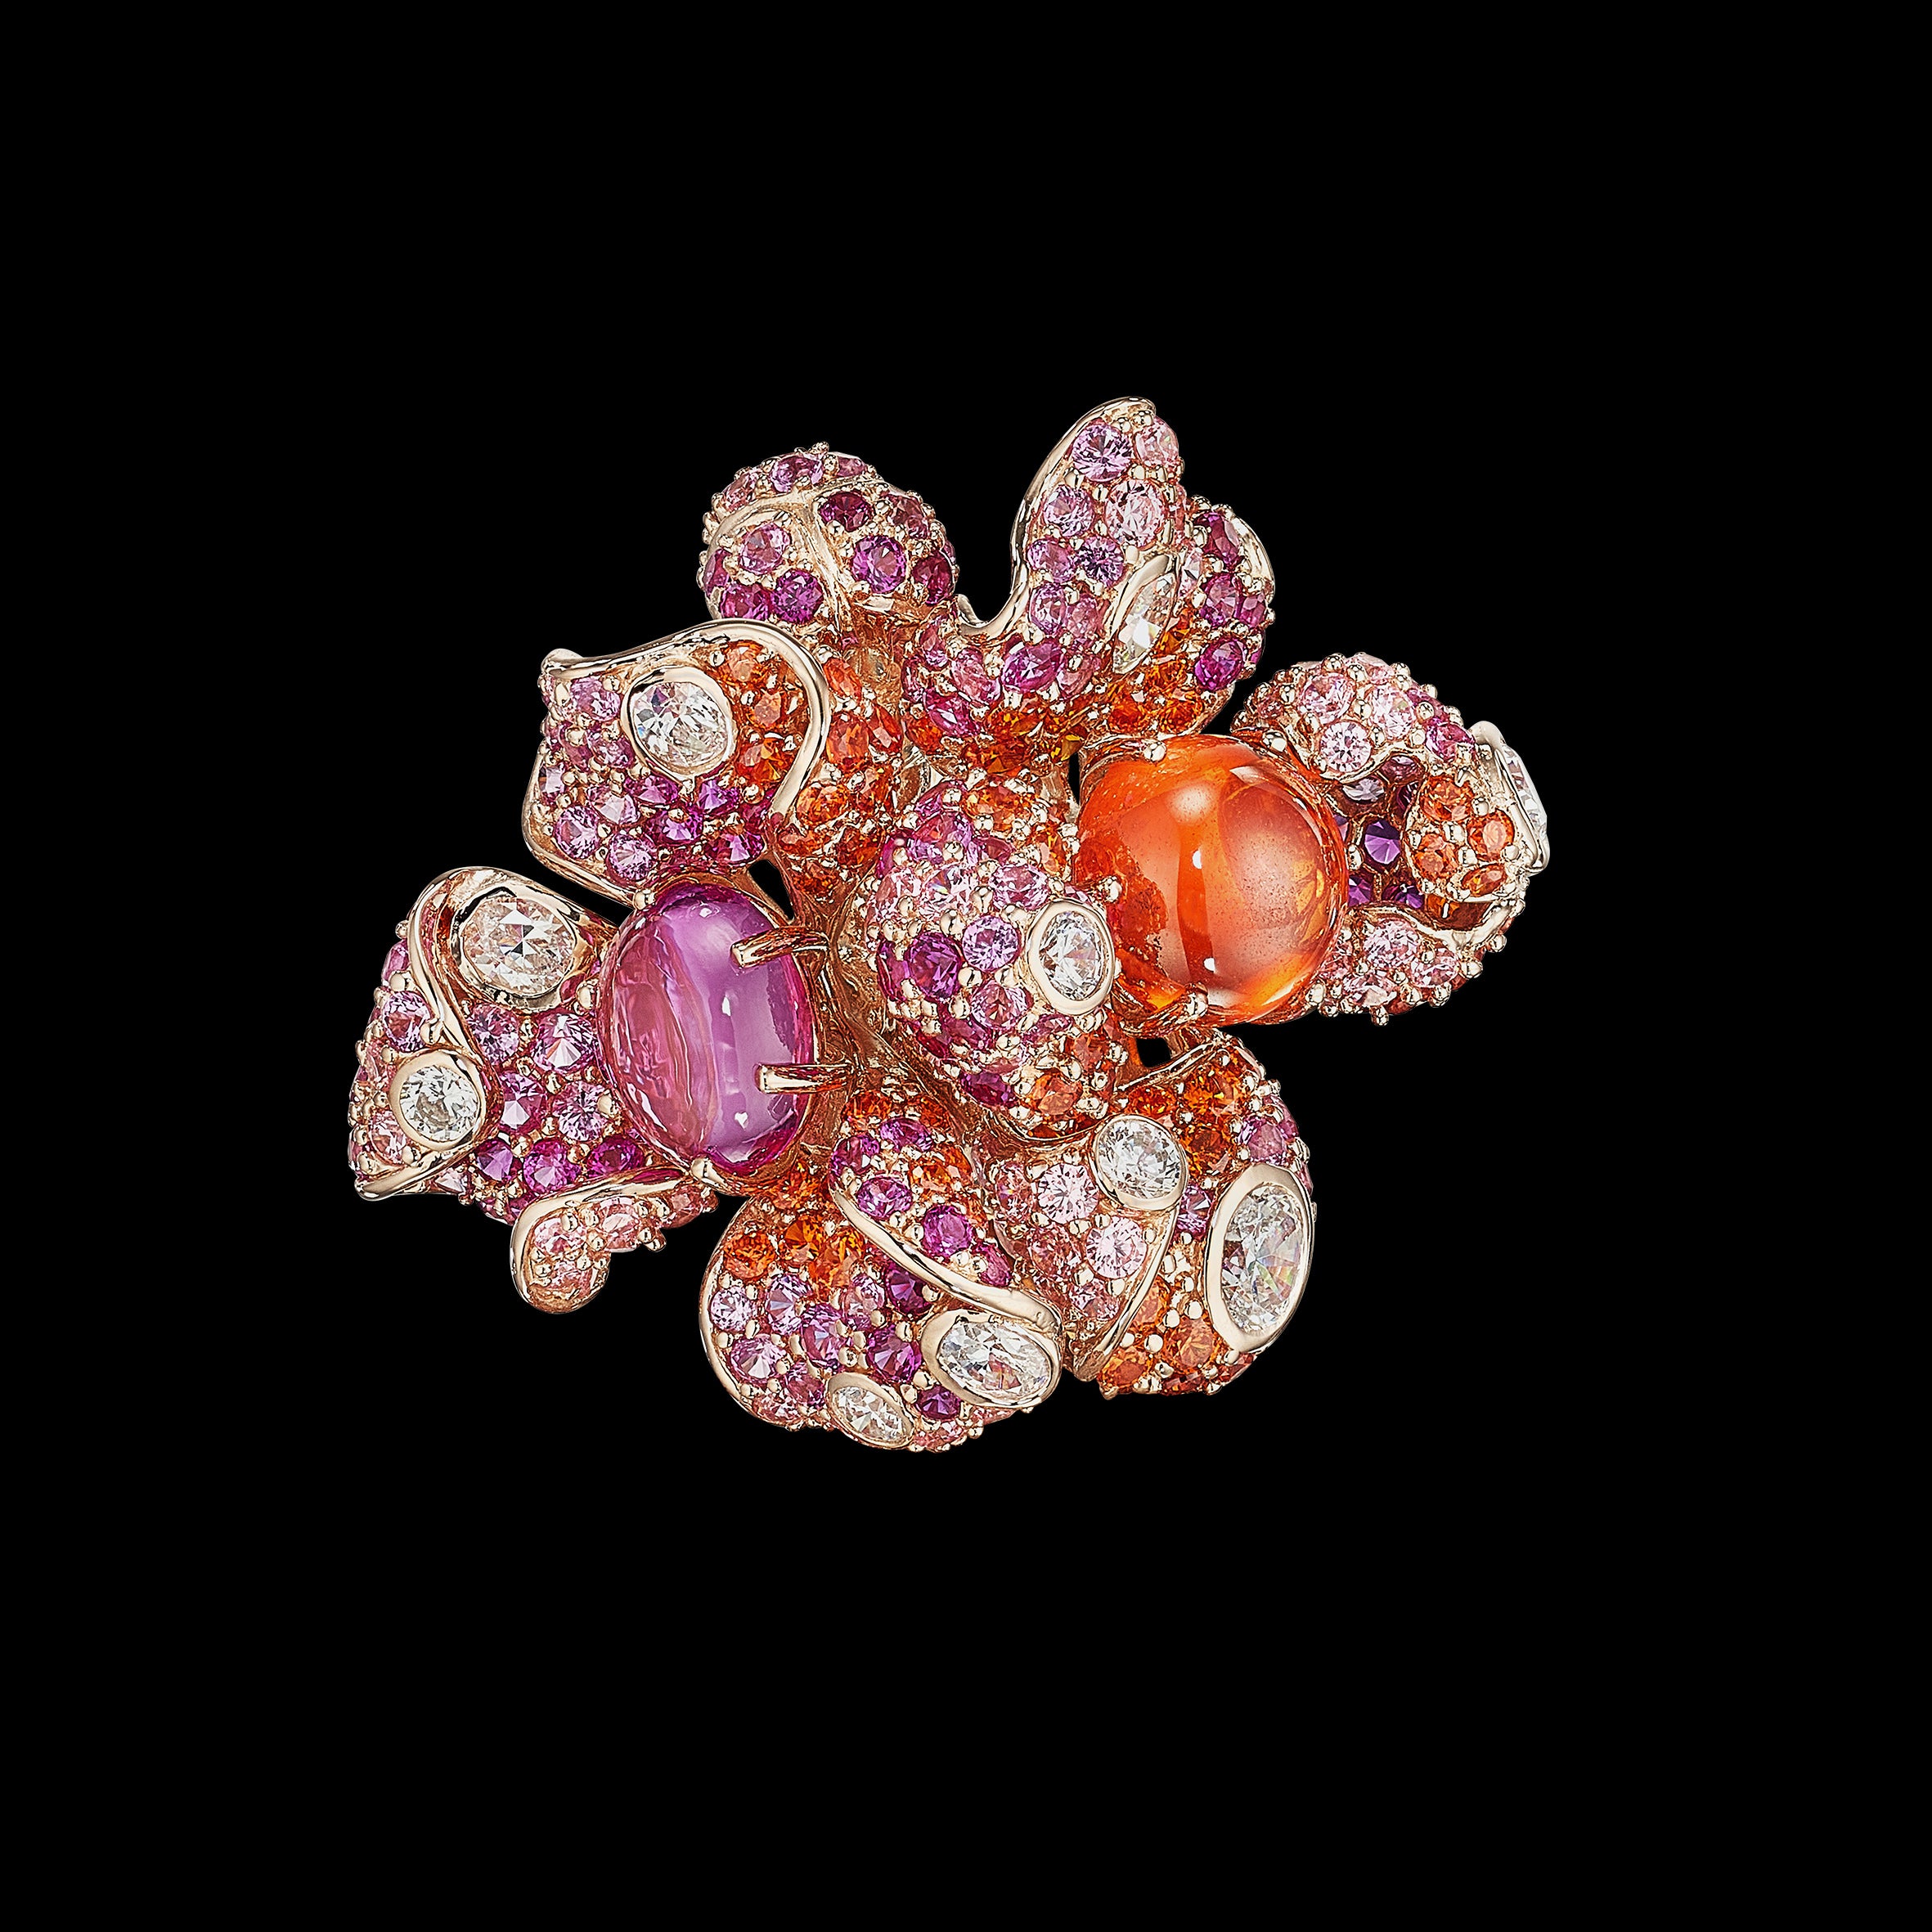 Sunset Blossom Ring, Ring, Anabela Chan Joaillerie - Fine jewelry with laboratory grown and created gemstones hand-crafted in the United Kingdom. Anabela Chan Joaillerie is the first fine jewellery brand in the world to champion laboratory-grown and created gemstones with high jewellery design, artisanal craftsmanship and a focus on ethical and sustainable innovations.